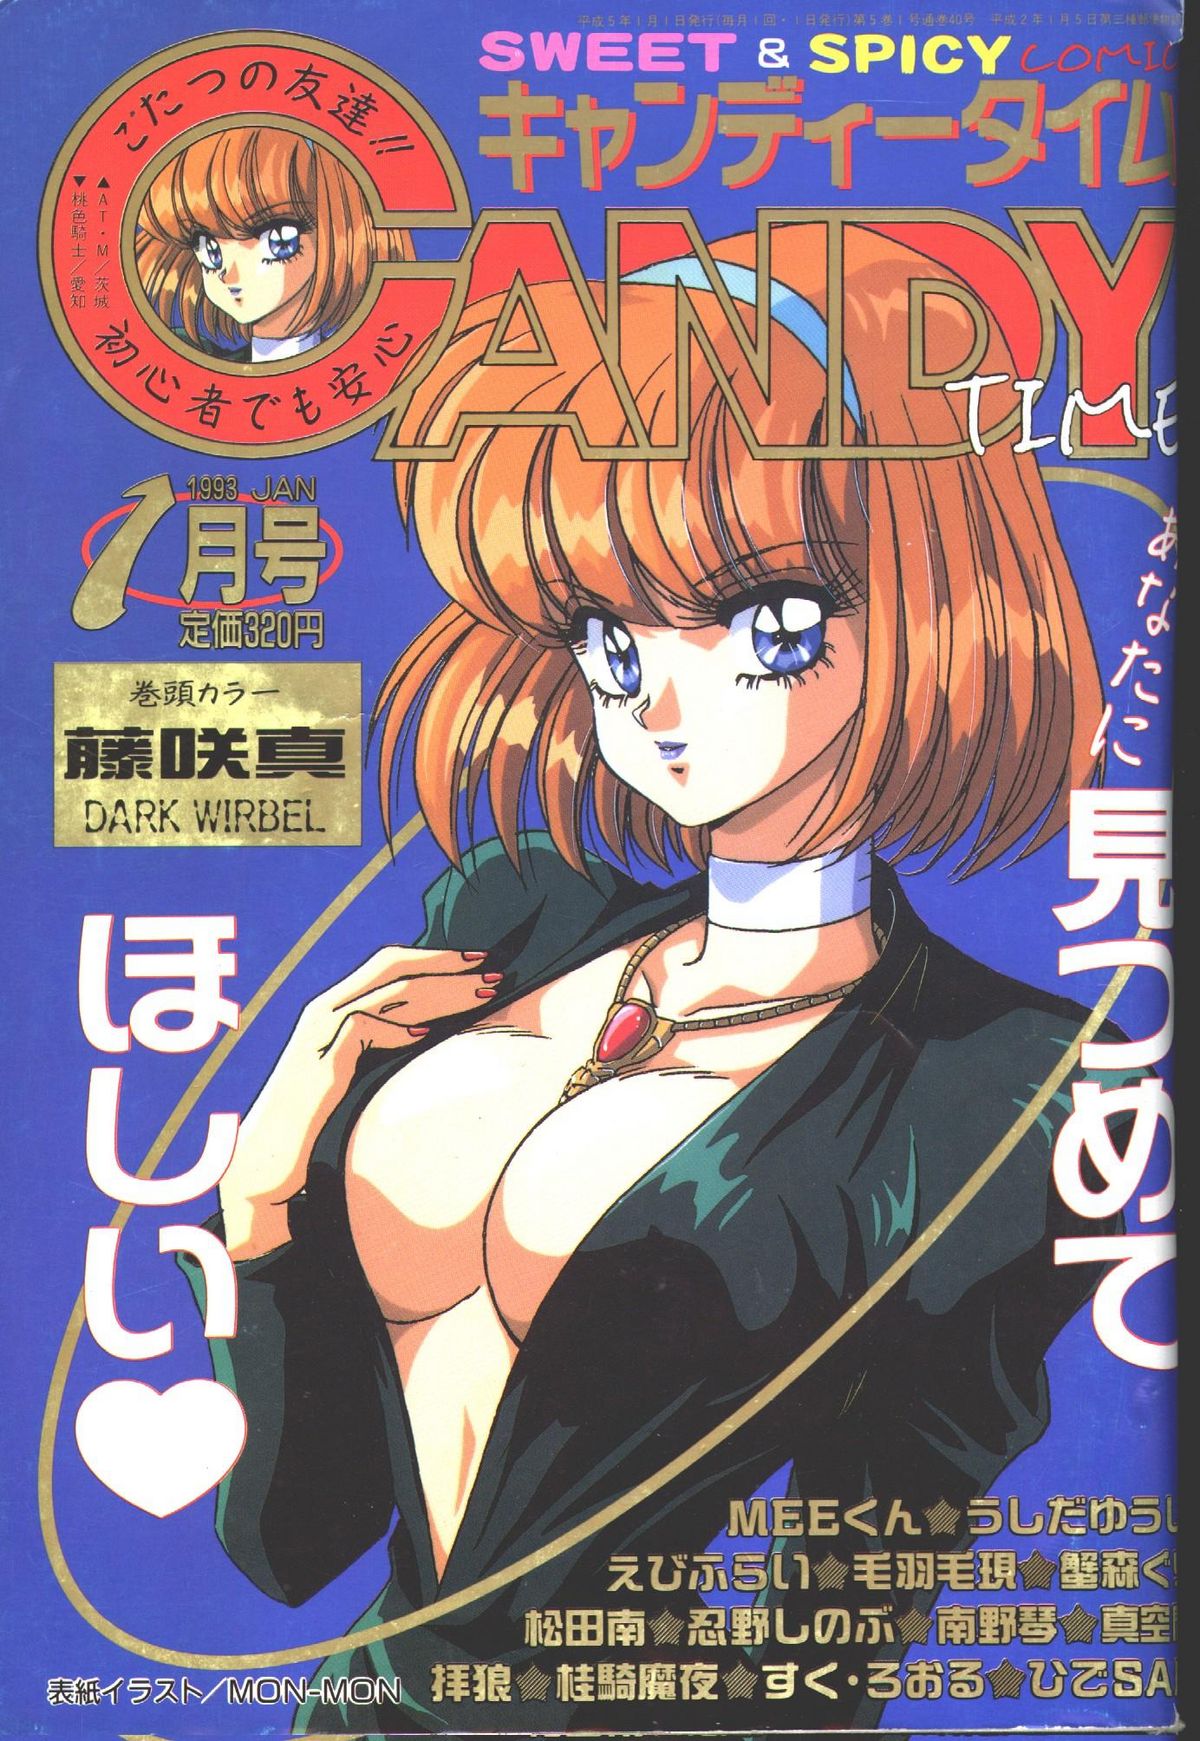 Candy Time 1993-01 [Incomplete] キャンディータイム 1993年01月号 [不完全]